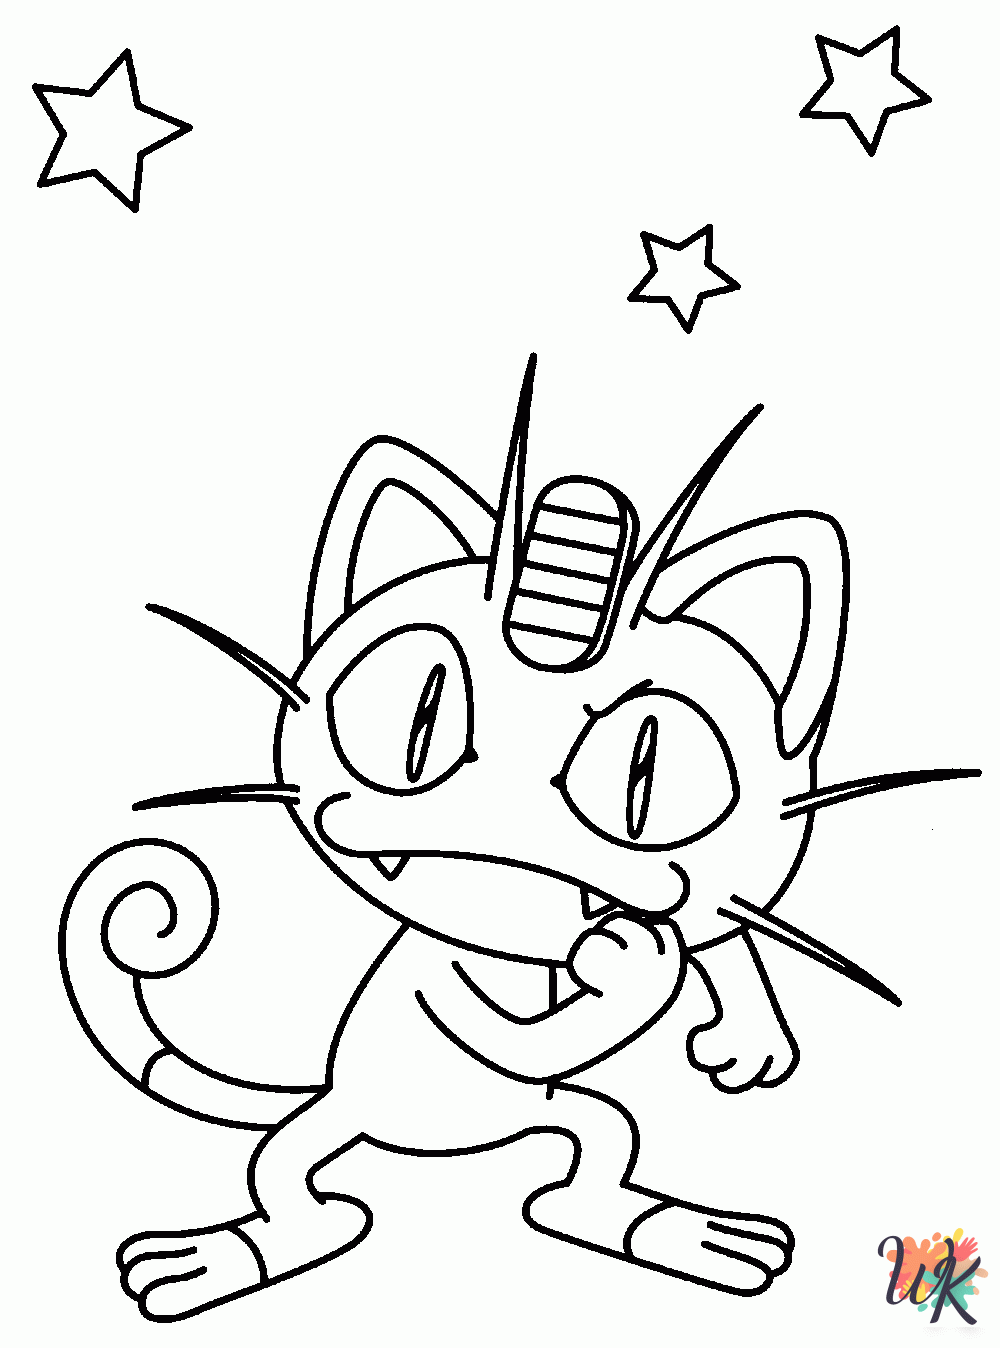 Meowth coloring book pages